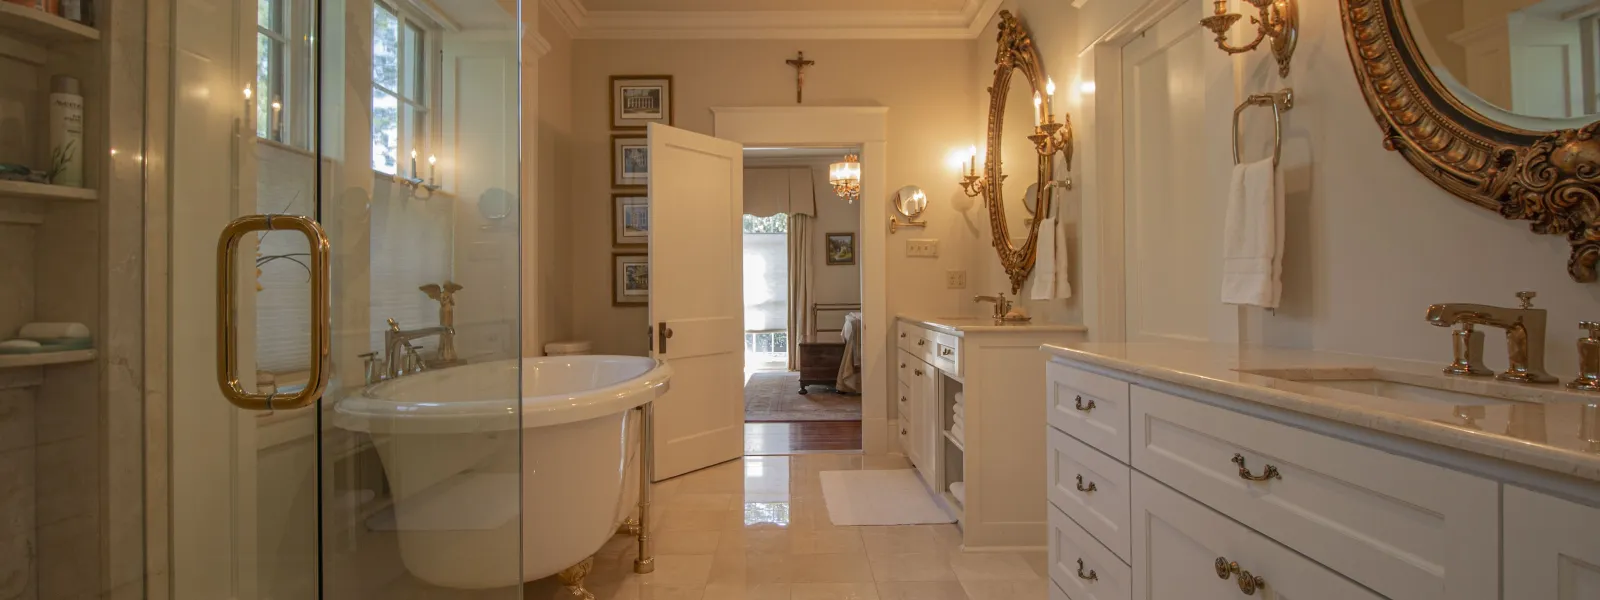 How To Choose a Bathroom Remodeling Company